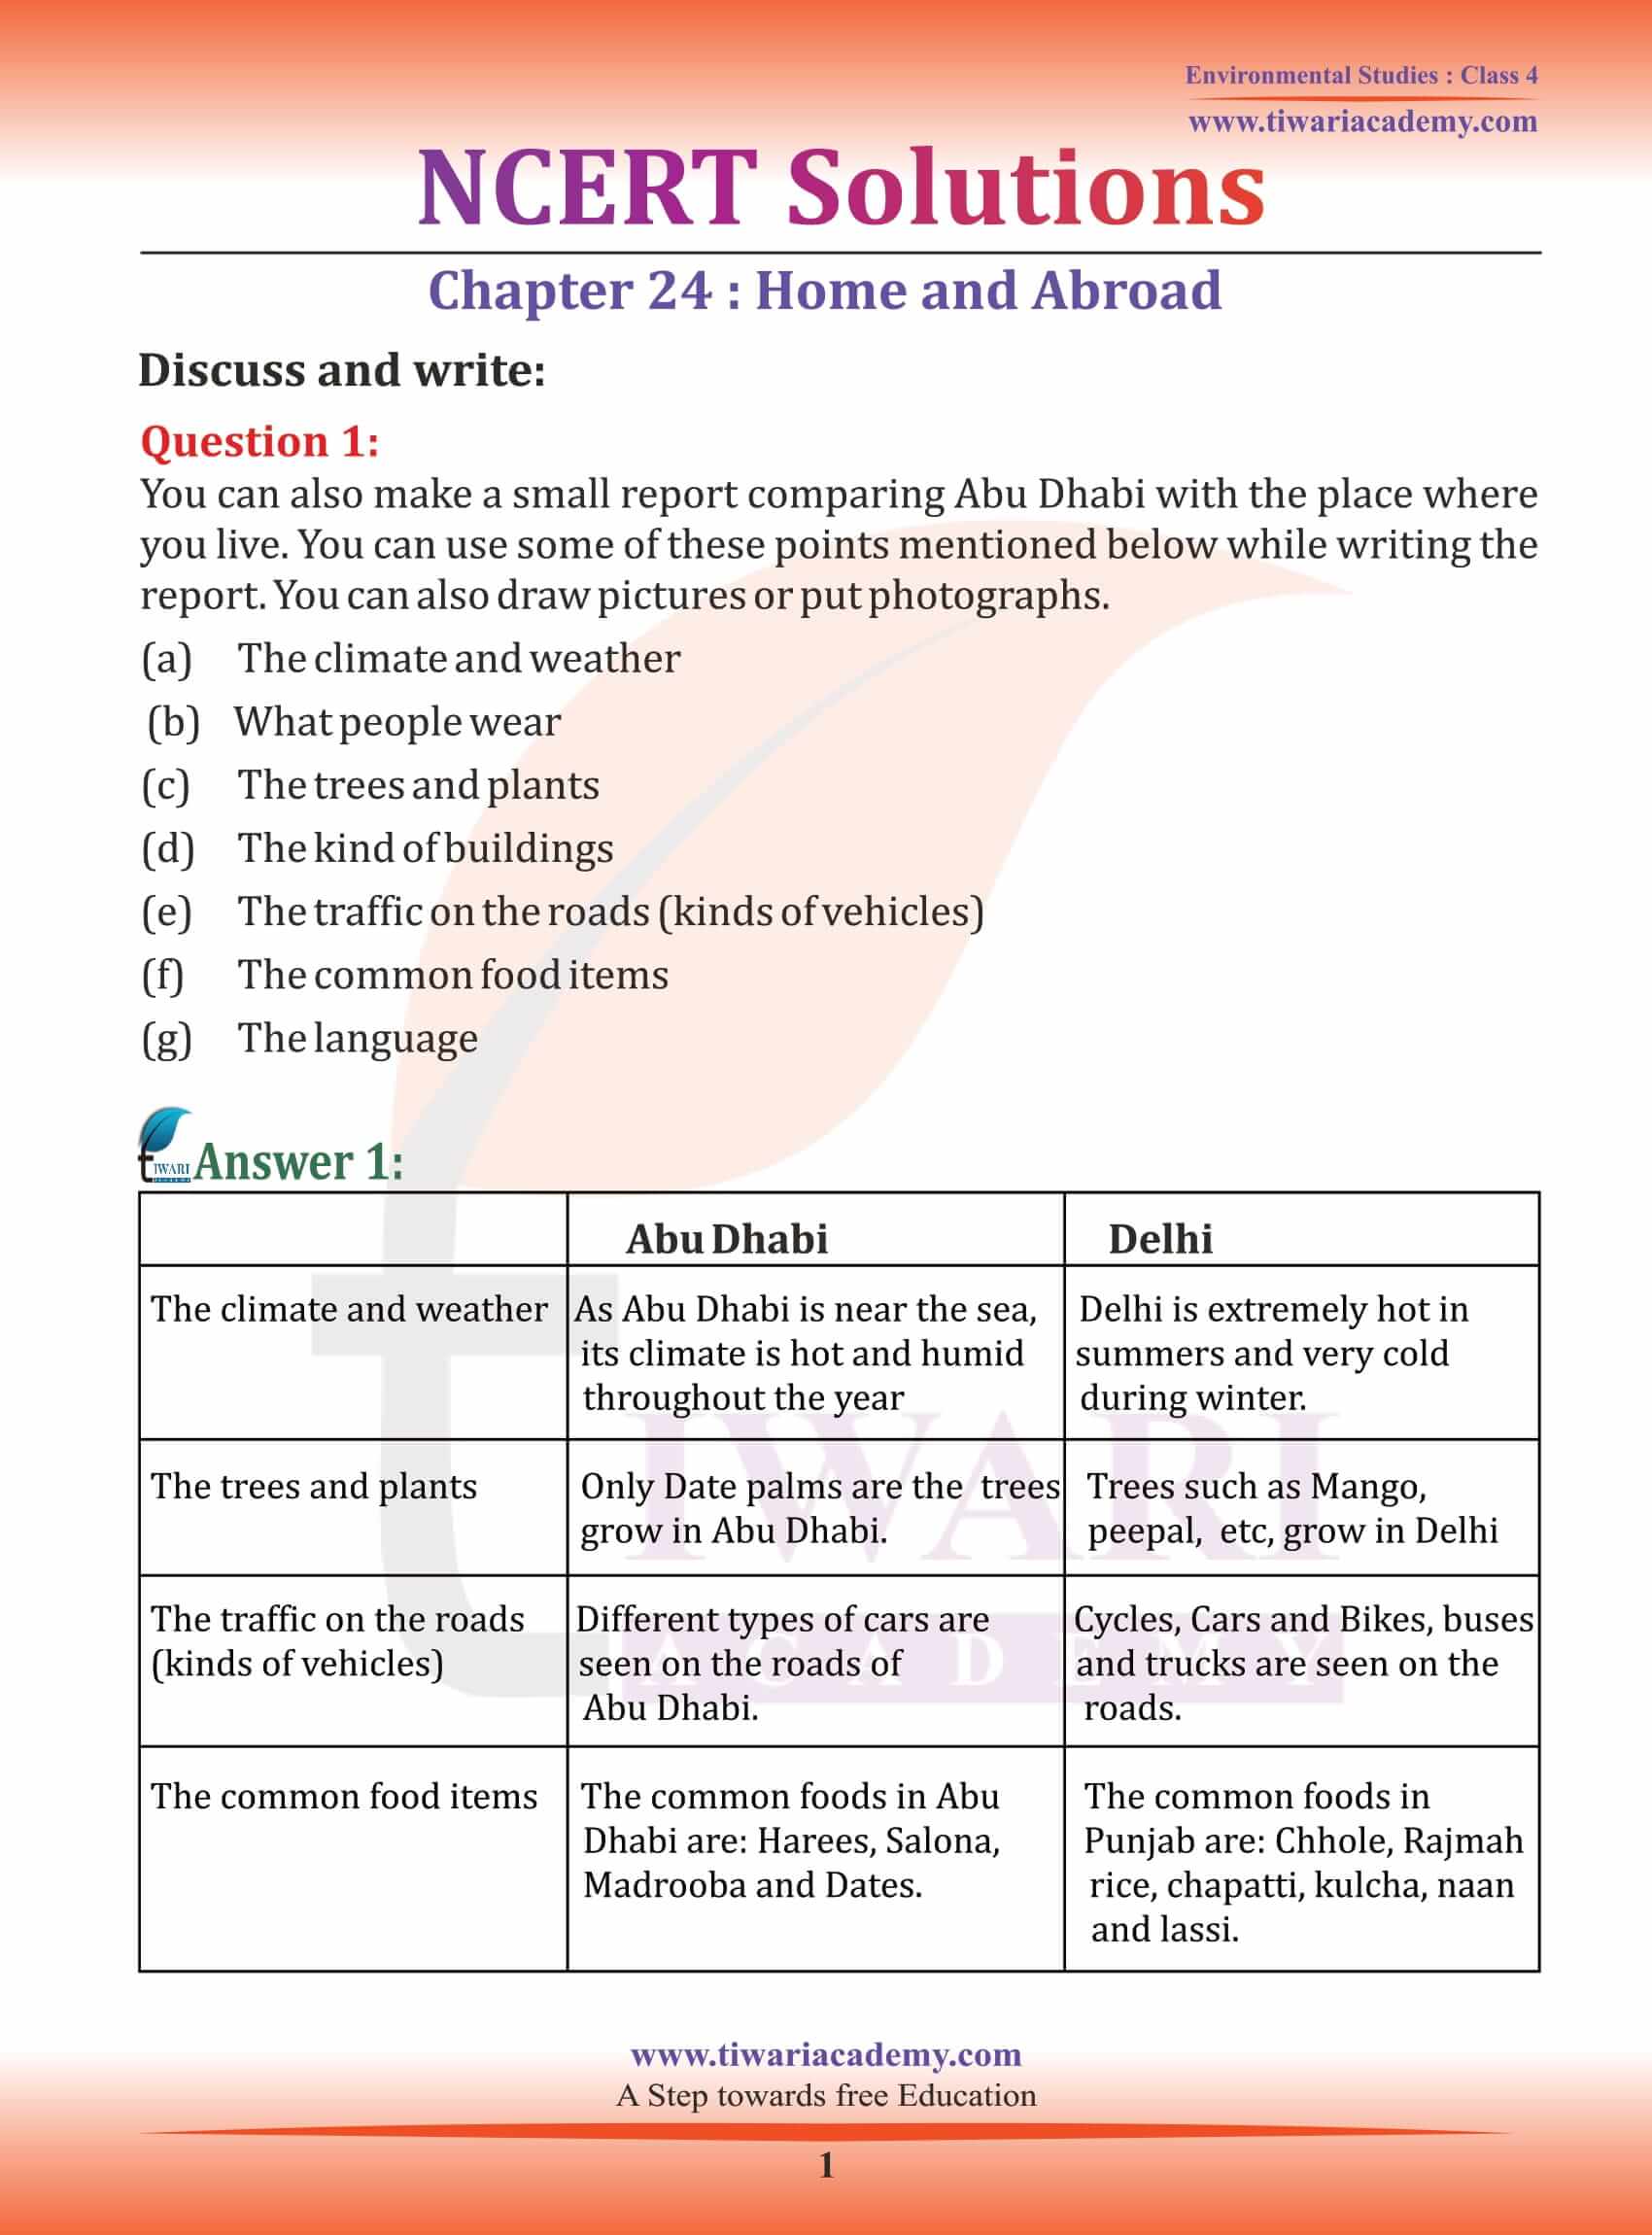 NCERT Solutions for Class 4 EVS Chapter 24 Home and Abroad